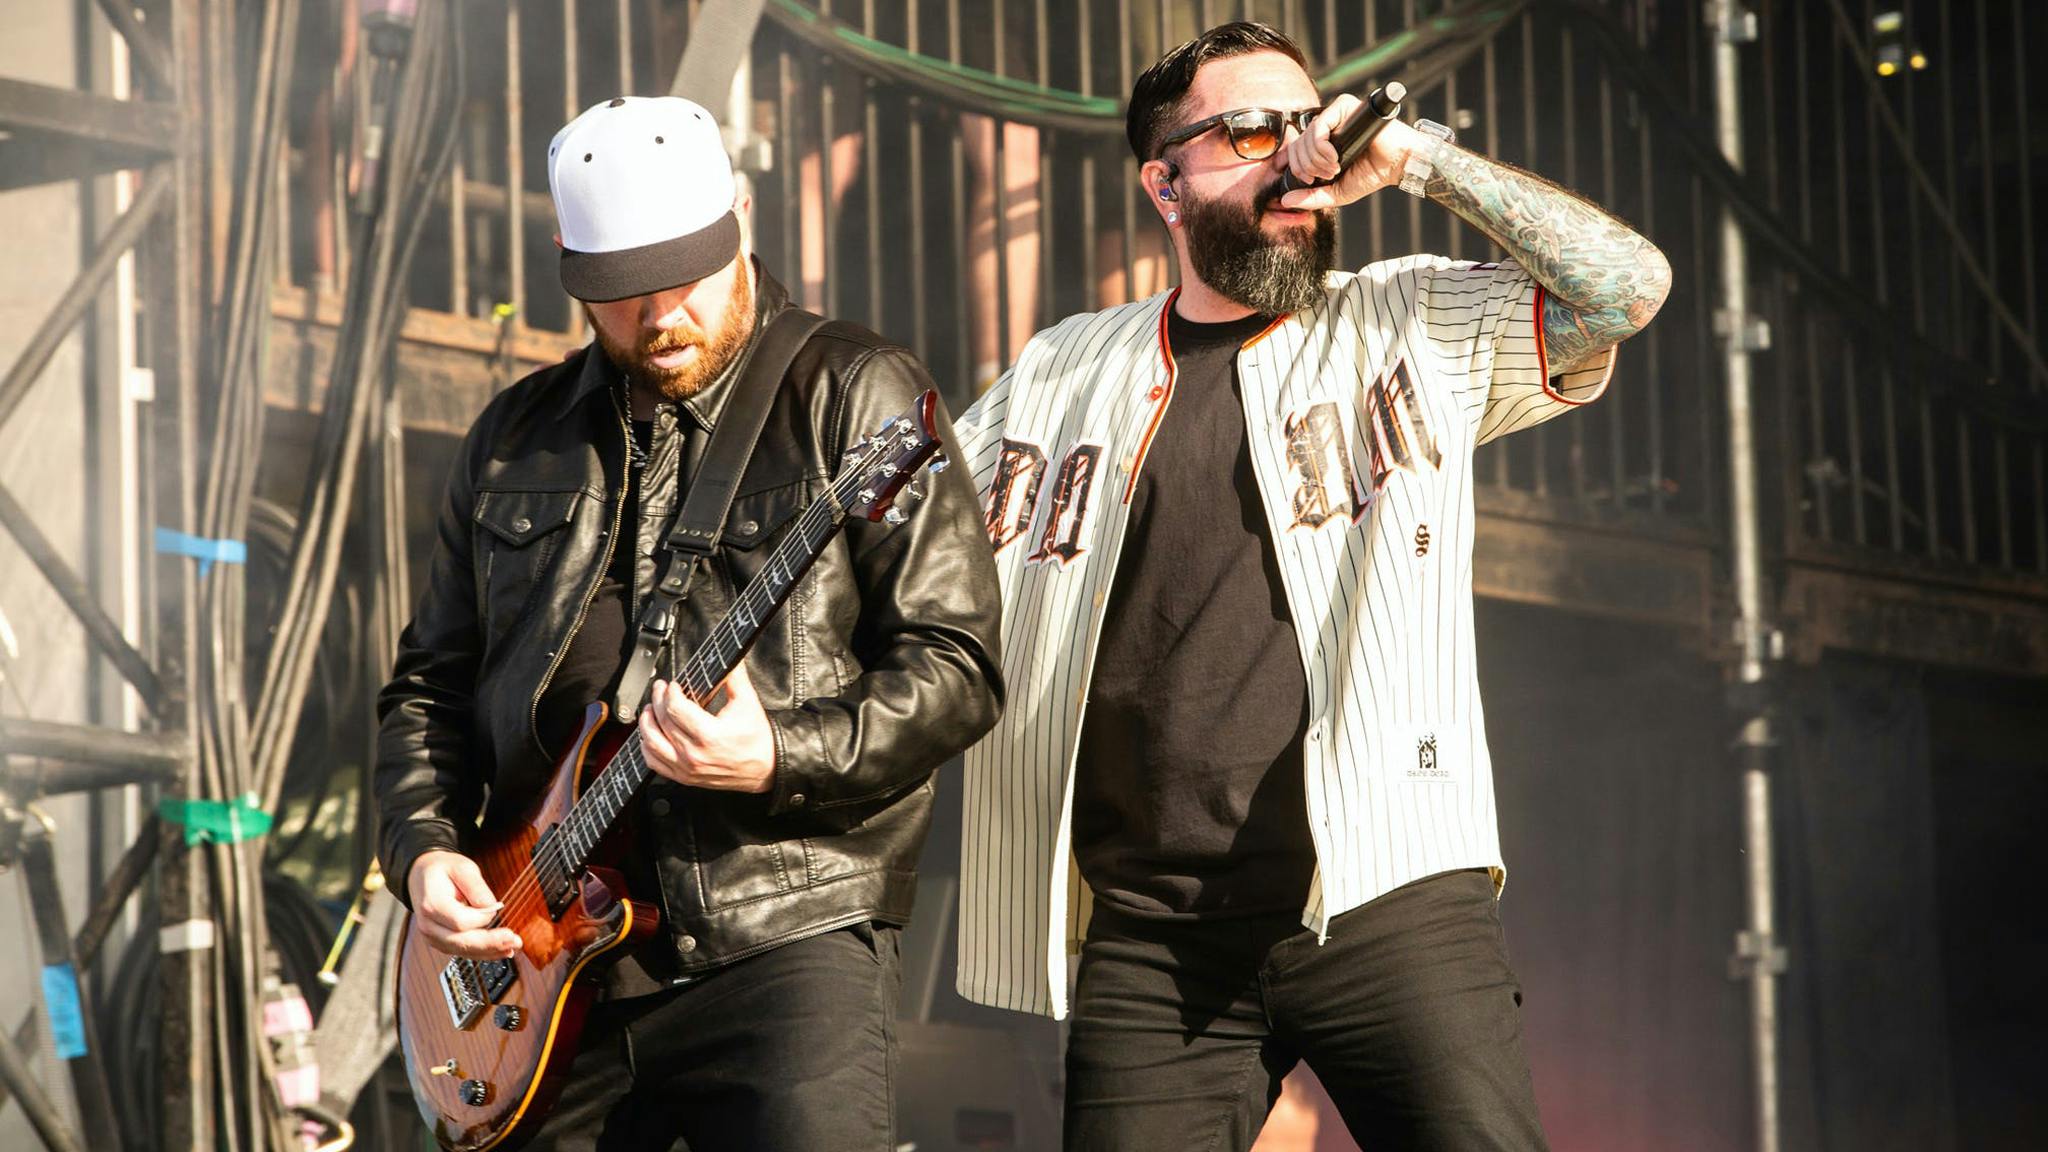 A Day To Remember announce new single, Miracle